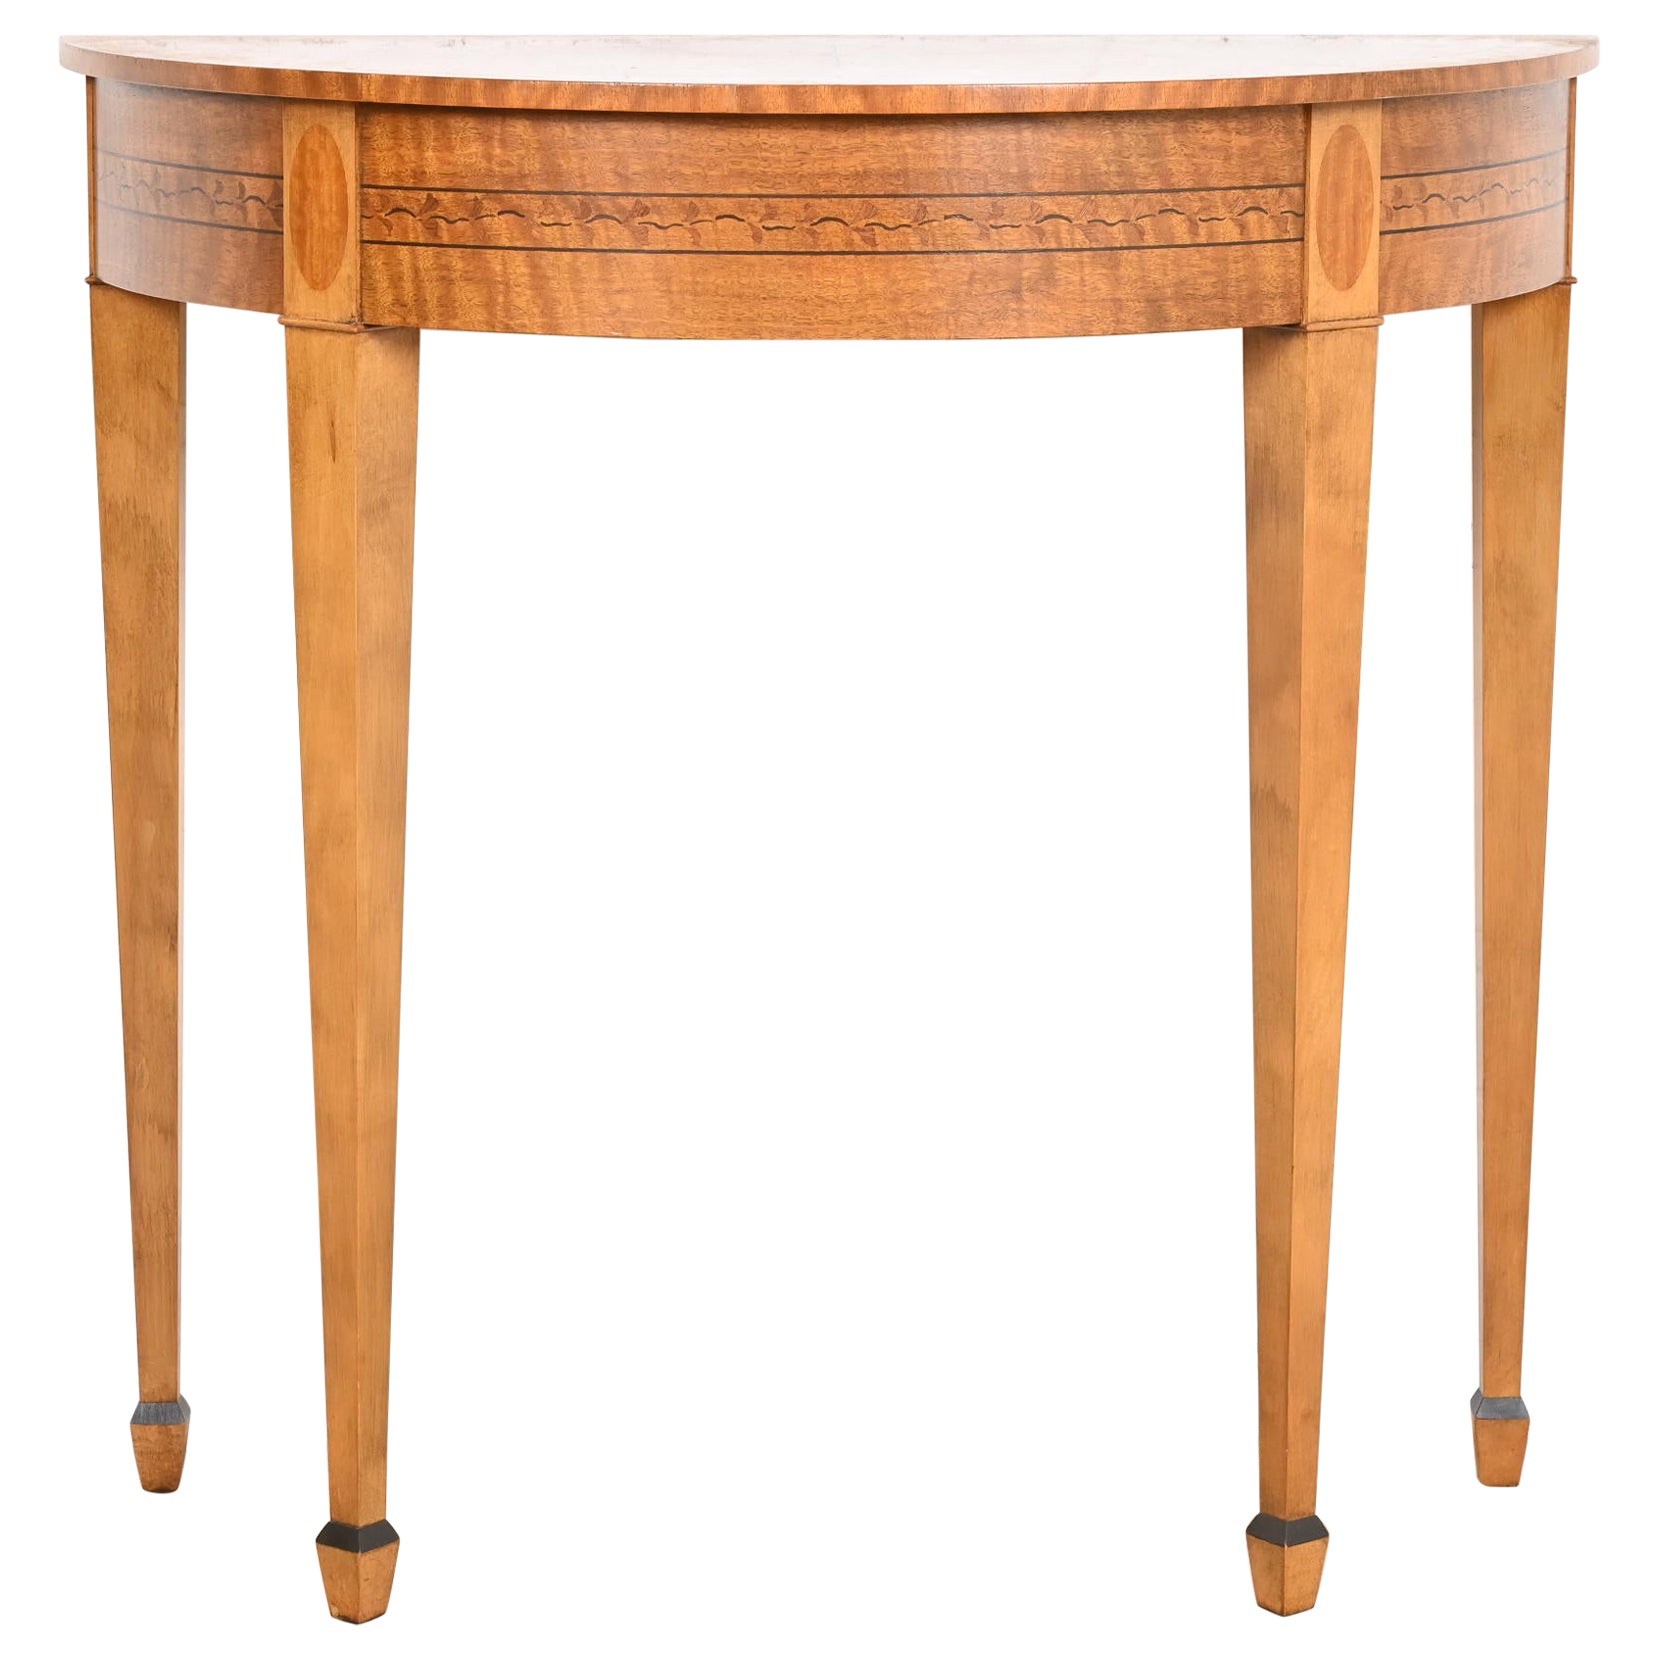 Baker Furniture Inlaid Mahogany Federal Demilune Console or Entry Table